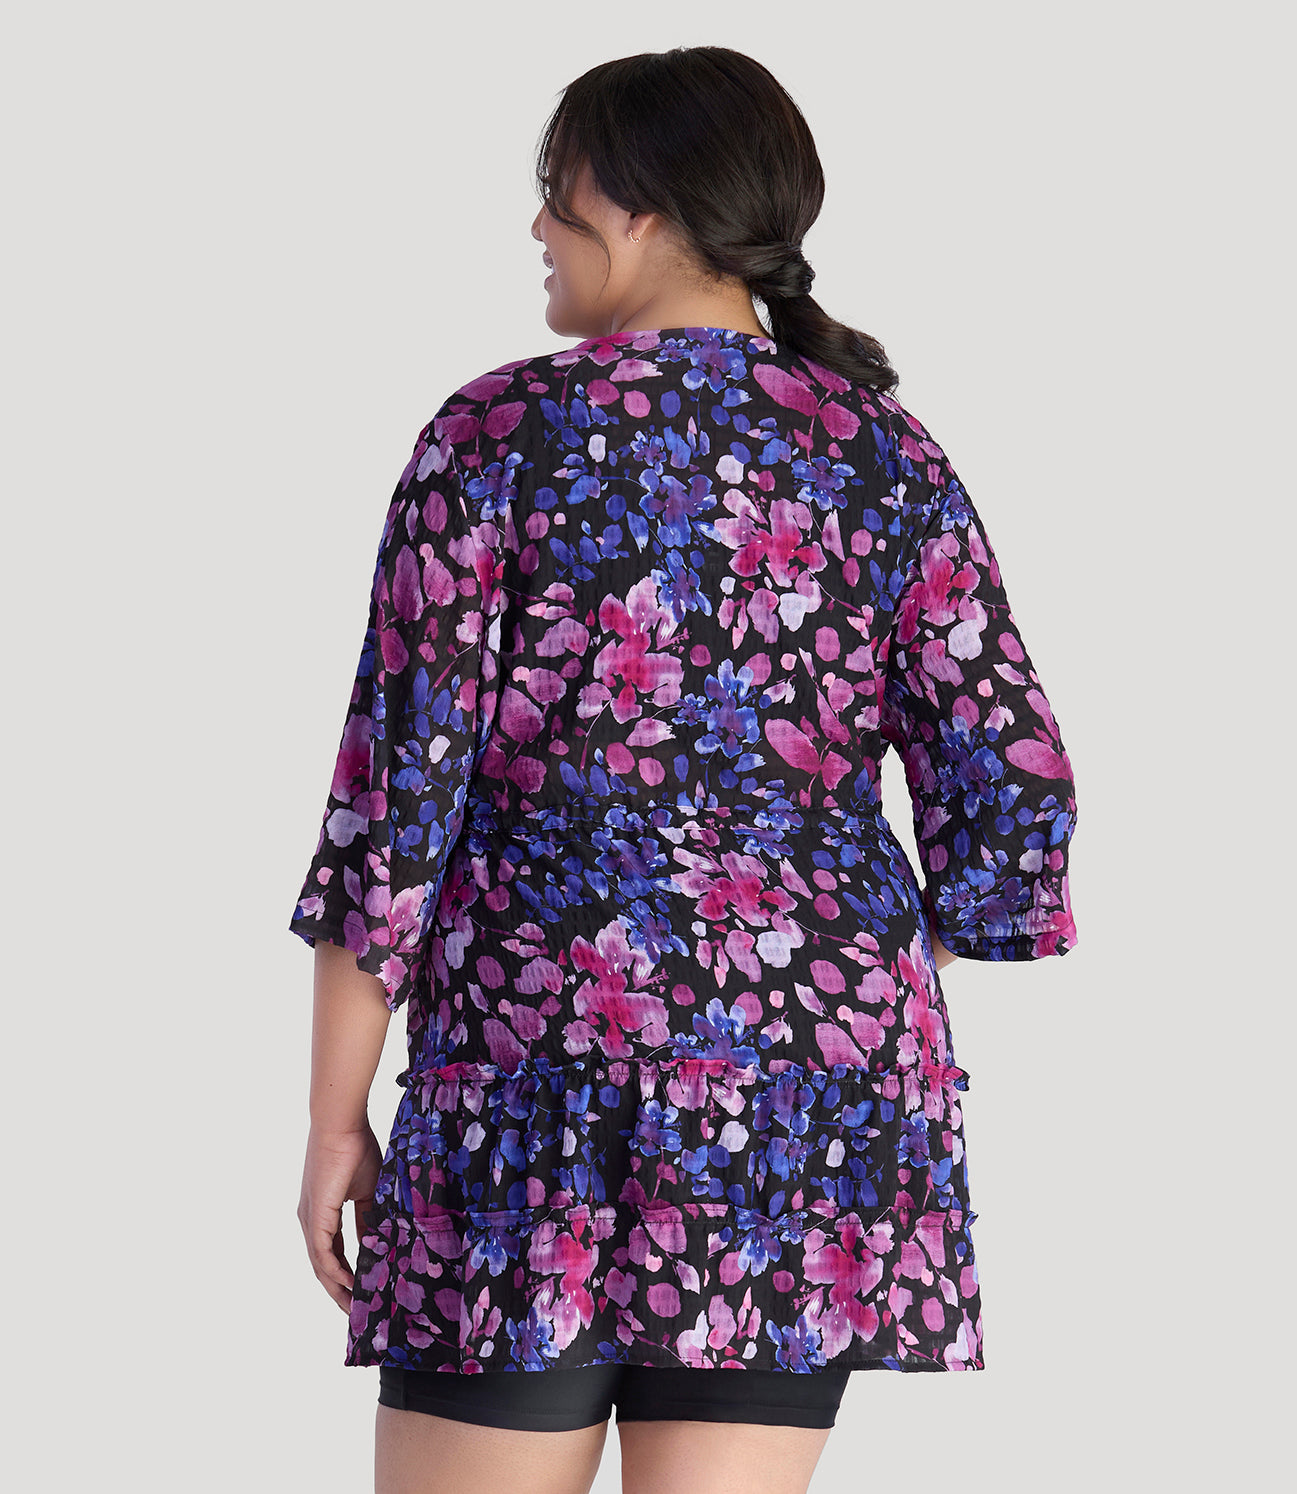 Plus size model, facing back, wearing JunoActive's BellaStyle Tie Front Tiered Cover-Up in floral elegance print.